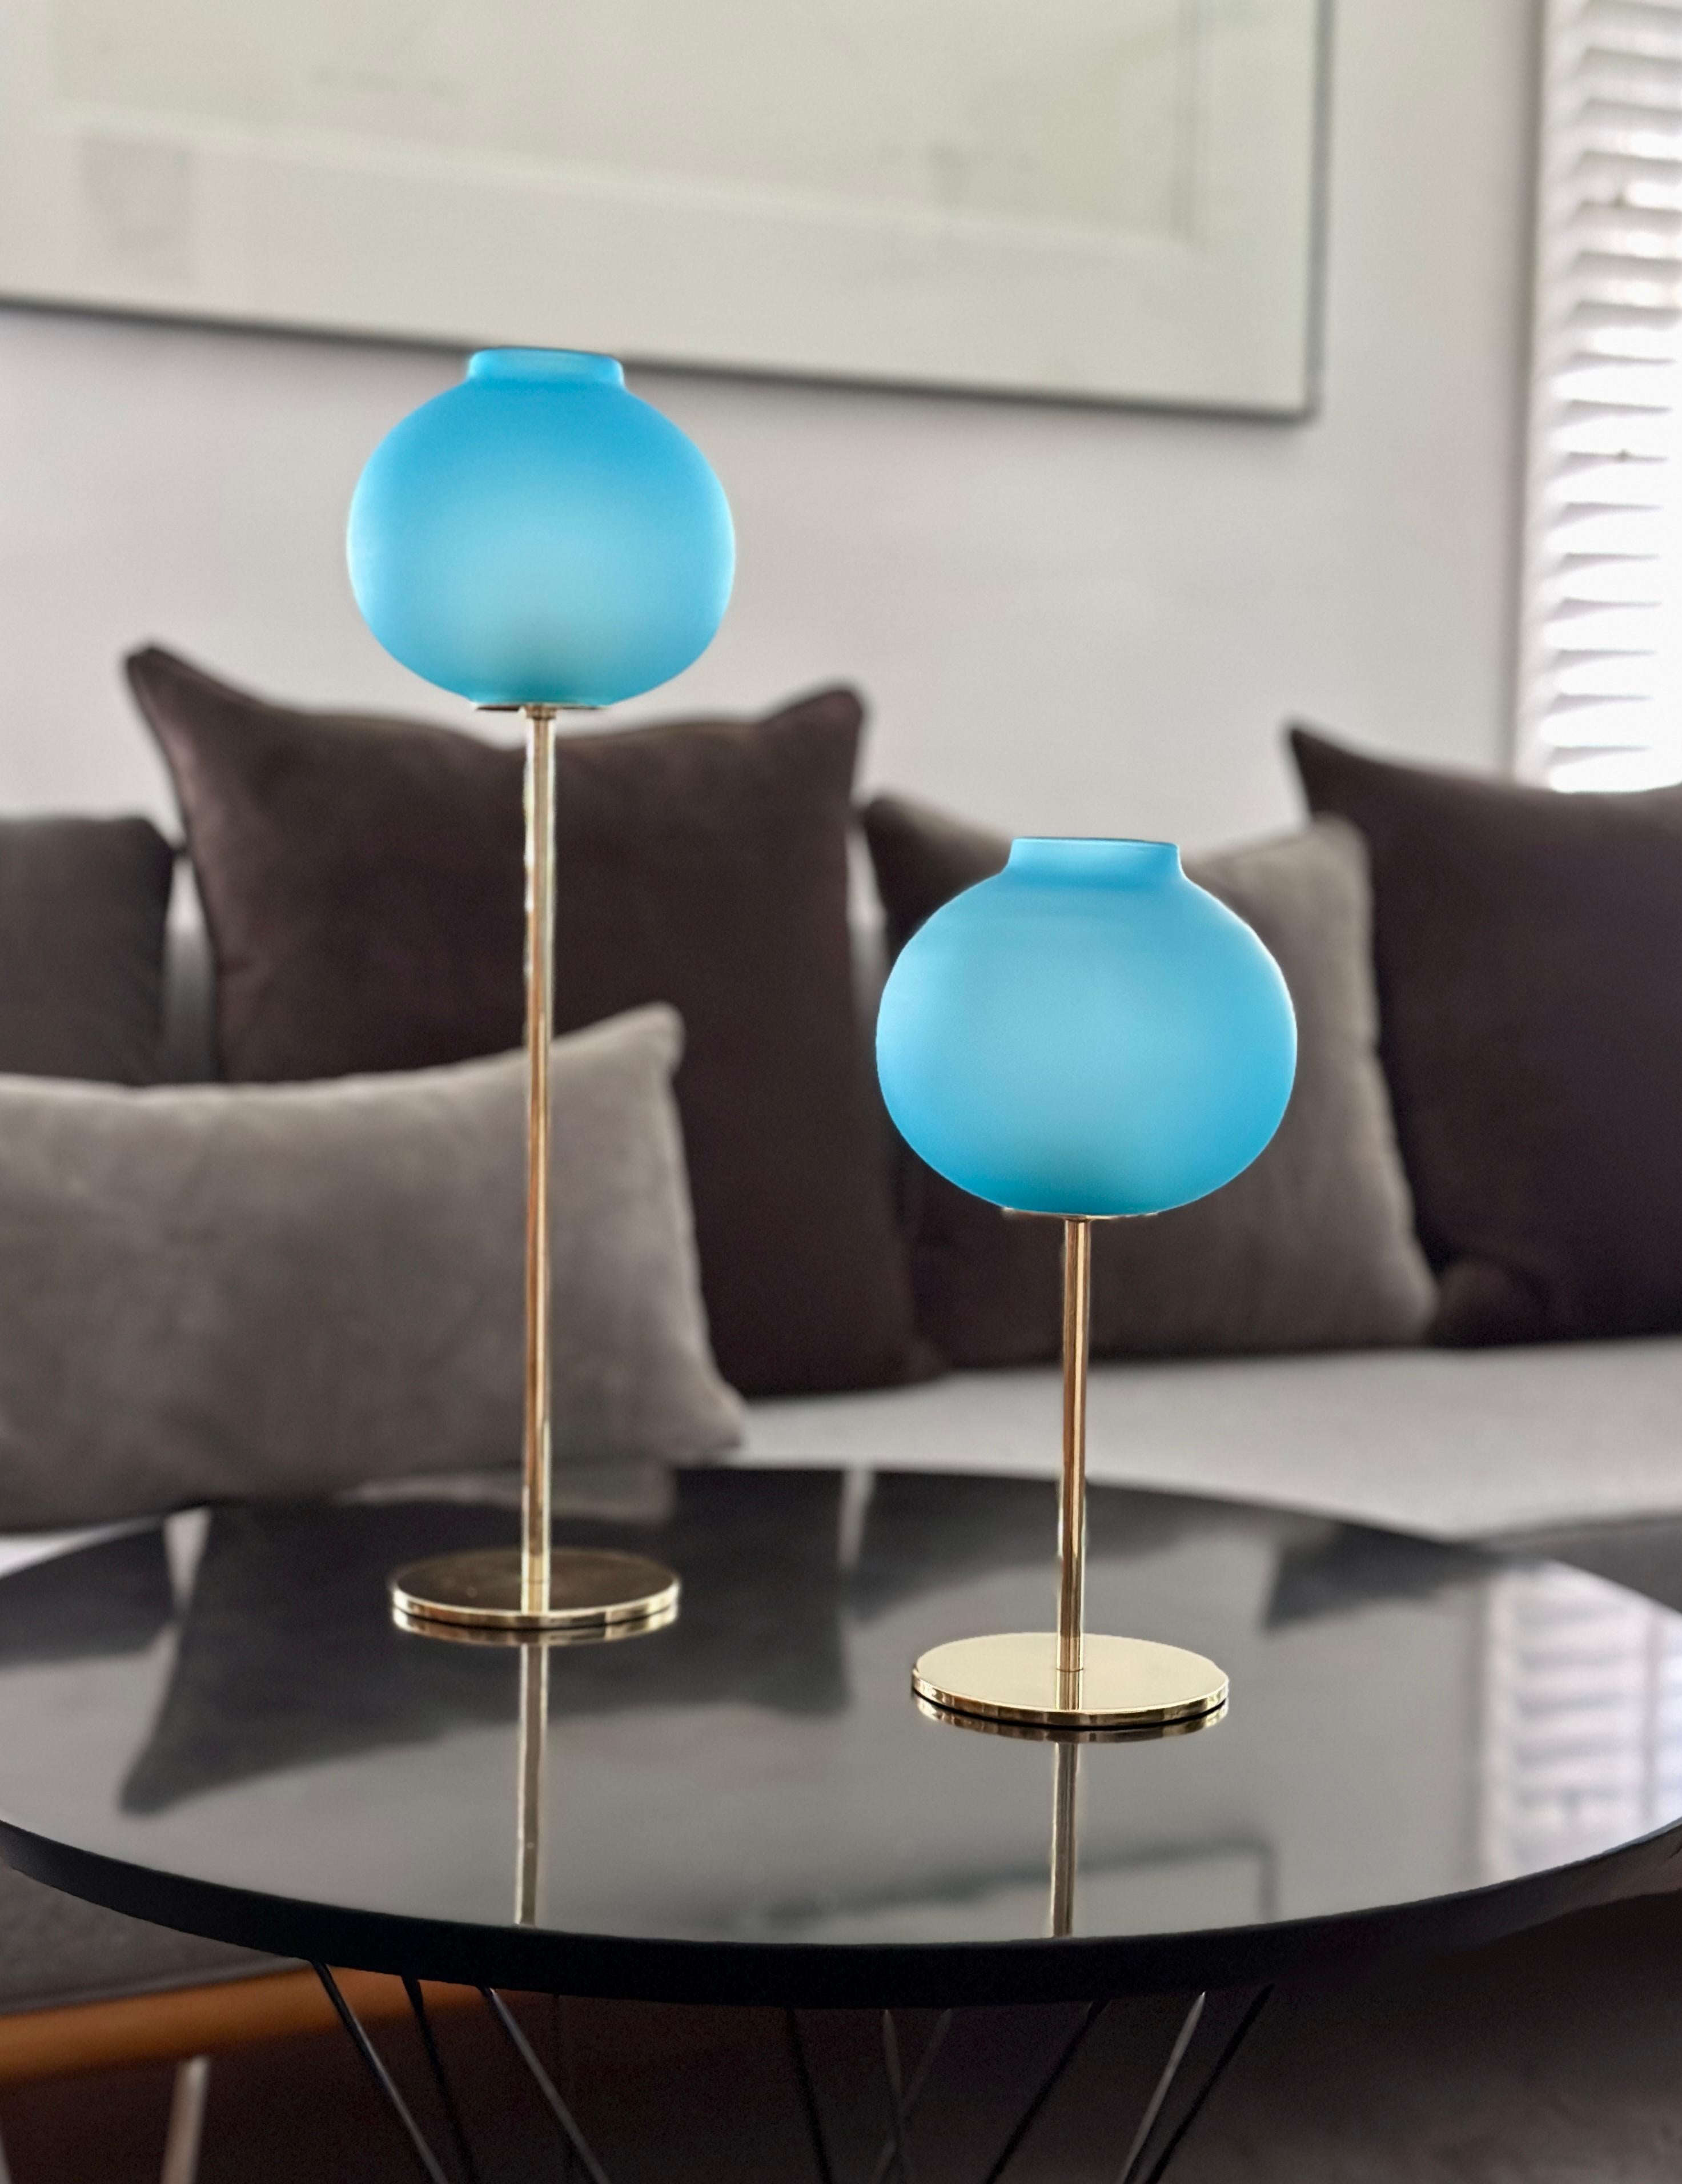 DESCRIPTION

A pair of candlesticks designed by Hans-Agne Jakobsson and produced by his own company, Hans-Agne Jakobsson AB sometime between 1960 - 1970. The candlesticks are solid brass with blue opaque glass globes. The tallest candlestick